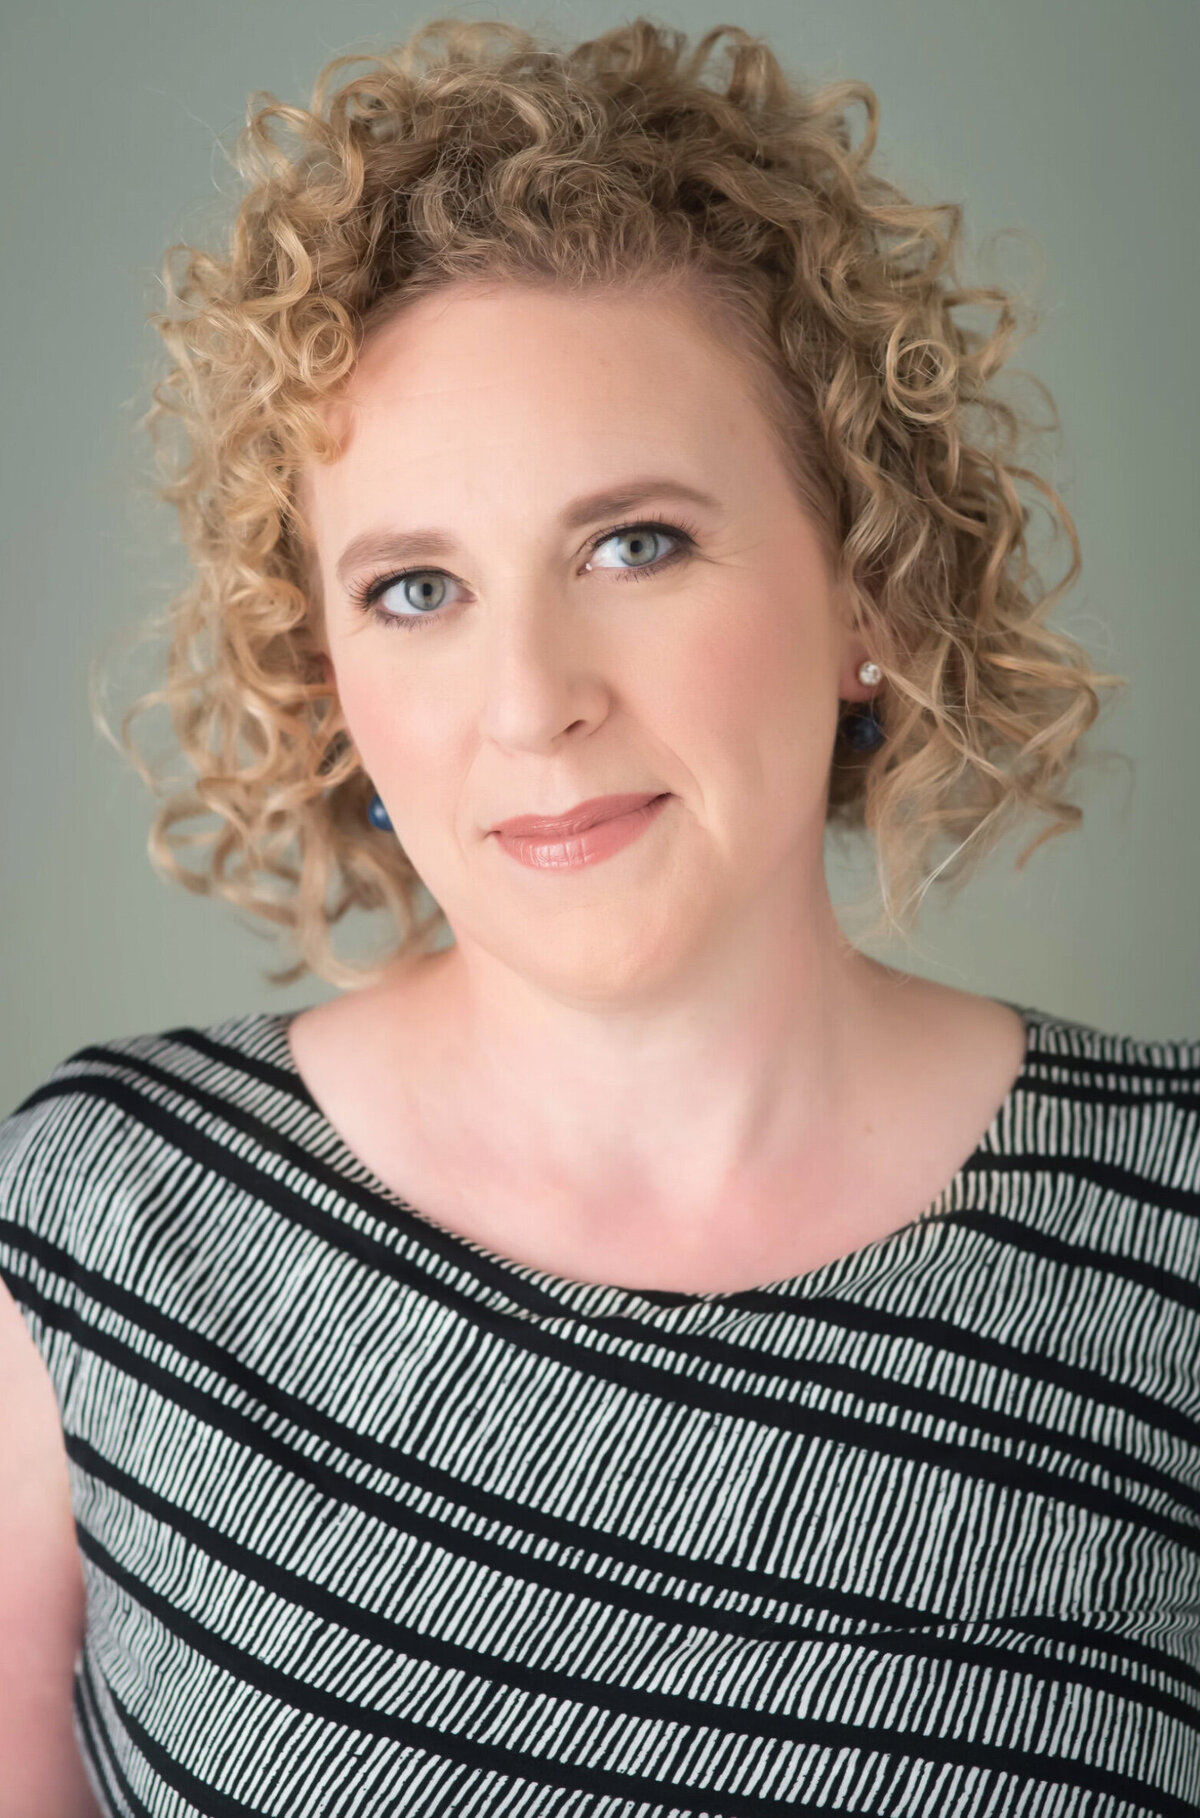 Woman with curly hair posing for a professional business headshot in New Jersey